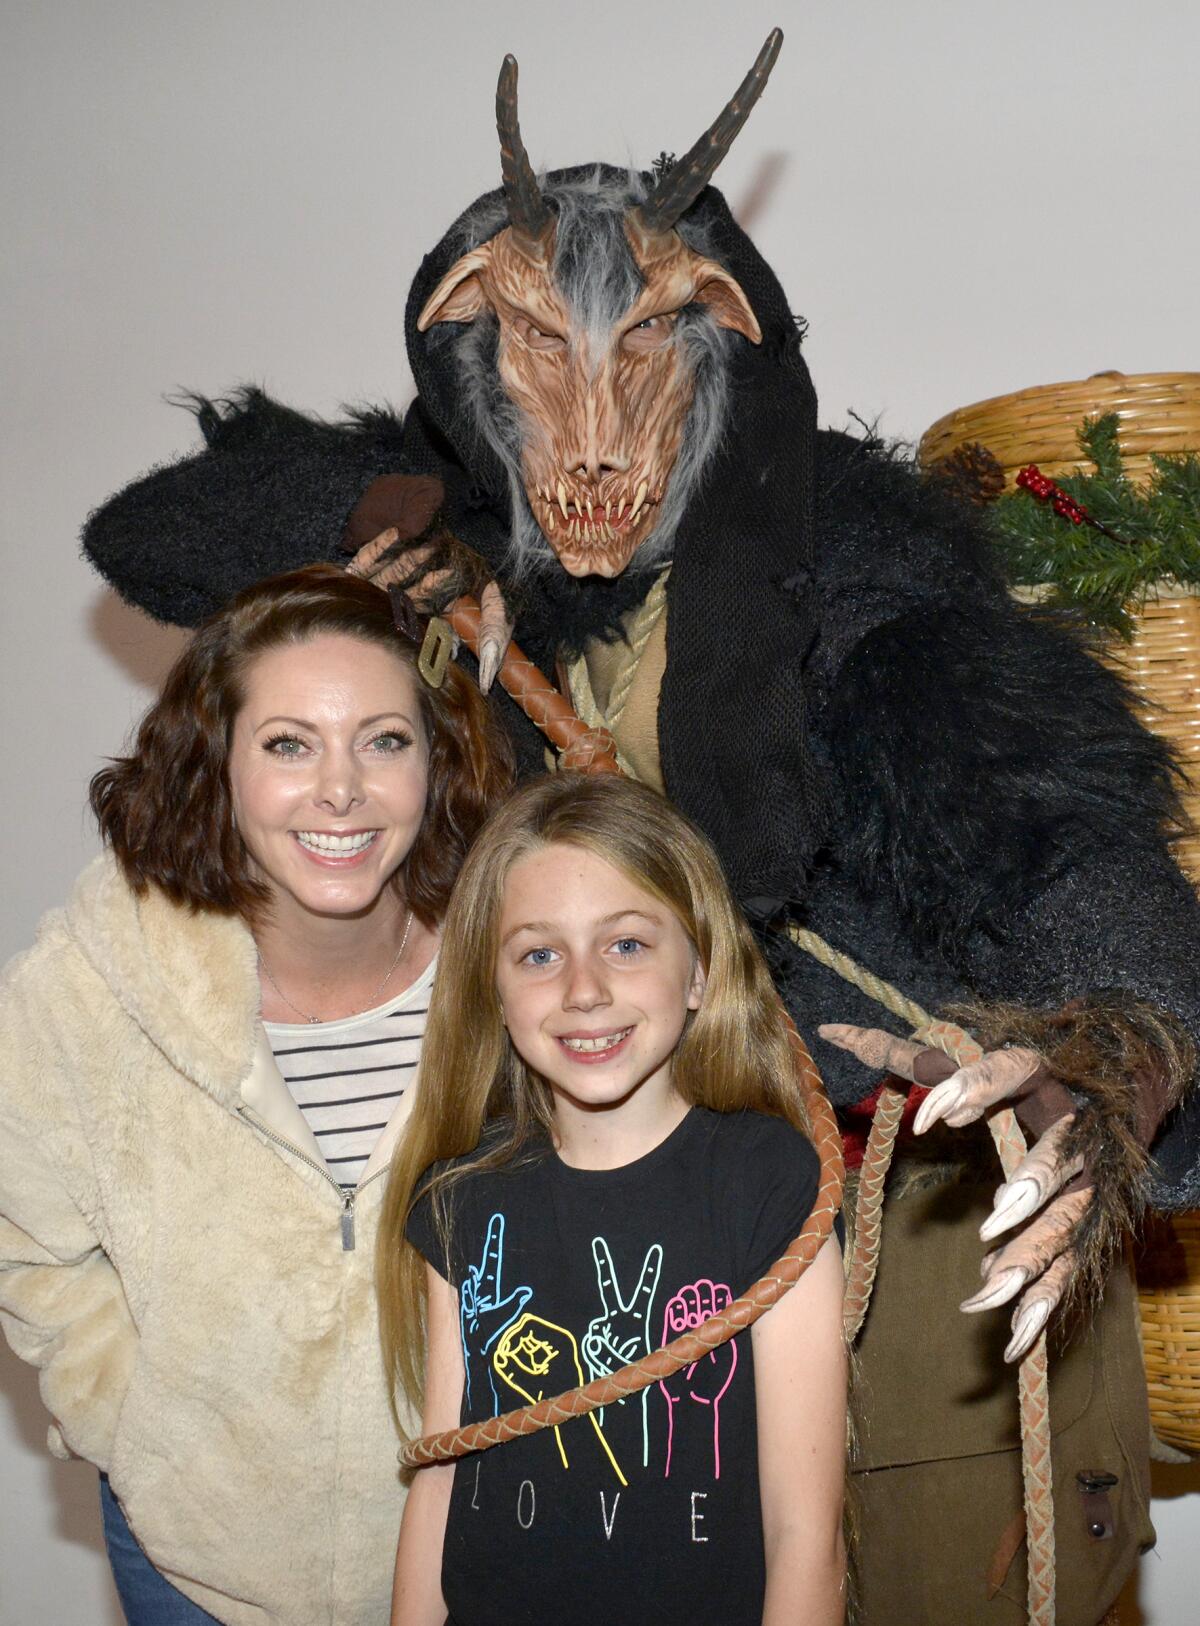 Rachel Buckman, left, was joined by her daughter, 8-year-old, Sophie, who attends Roosevelt Elementary School, to meet Krampus, portrayed by Bill Rude, at Dark Delicacies in Burbank.